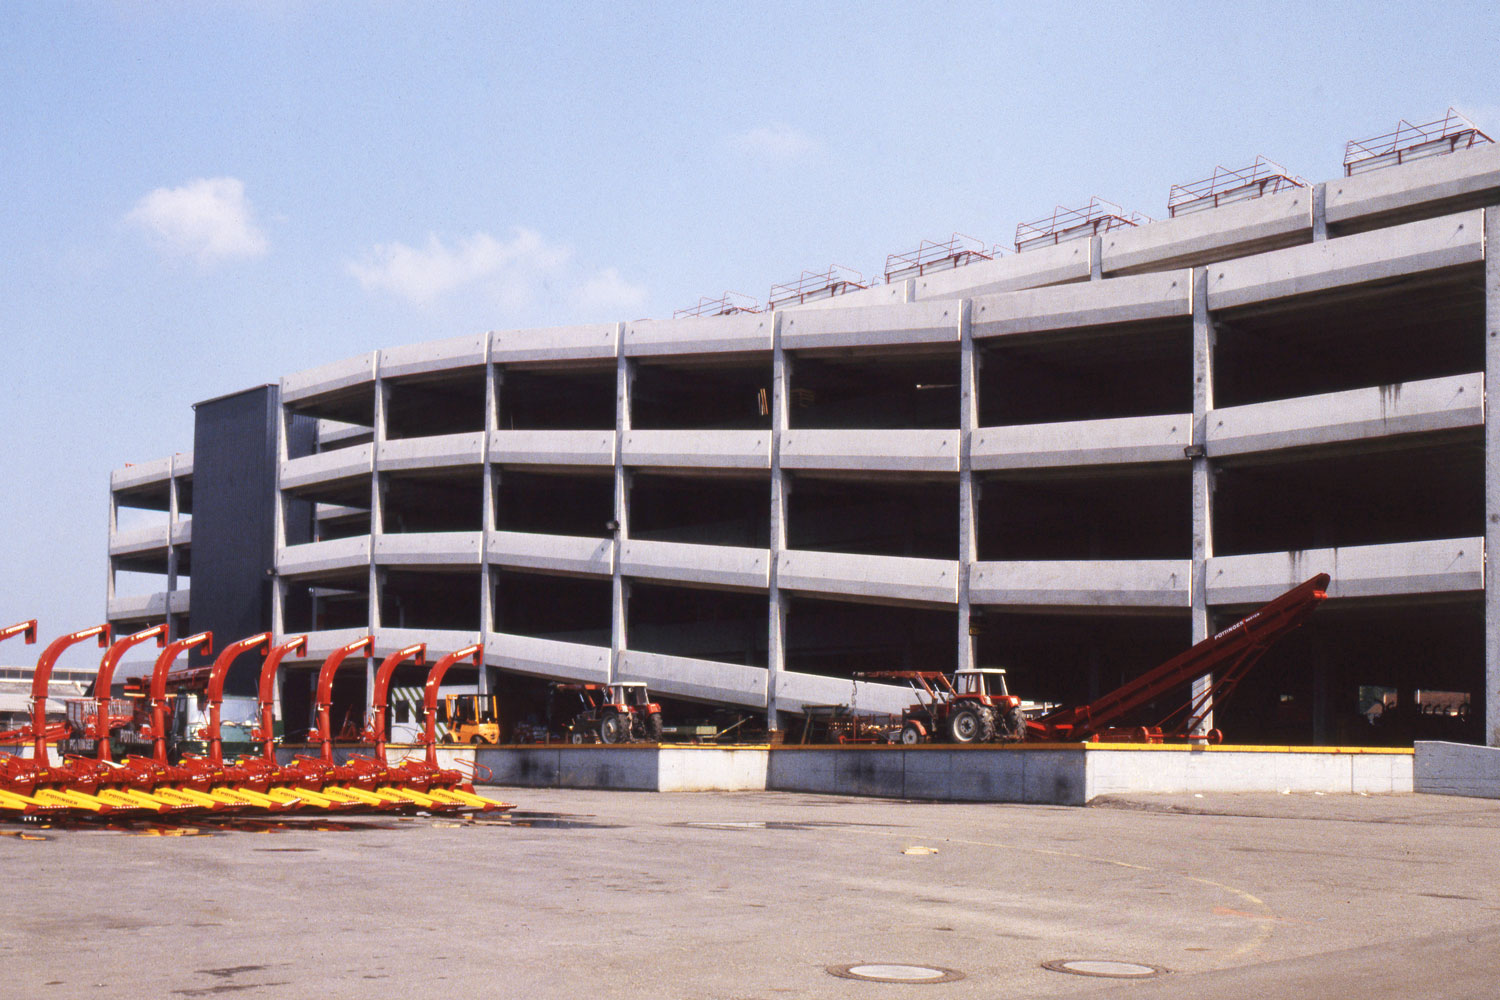 Could easily be mistaken for a multi-storey car park: The storage hall opened in 1977.